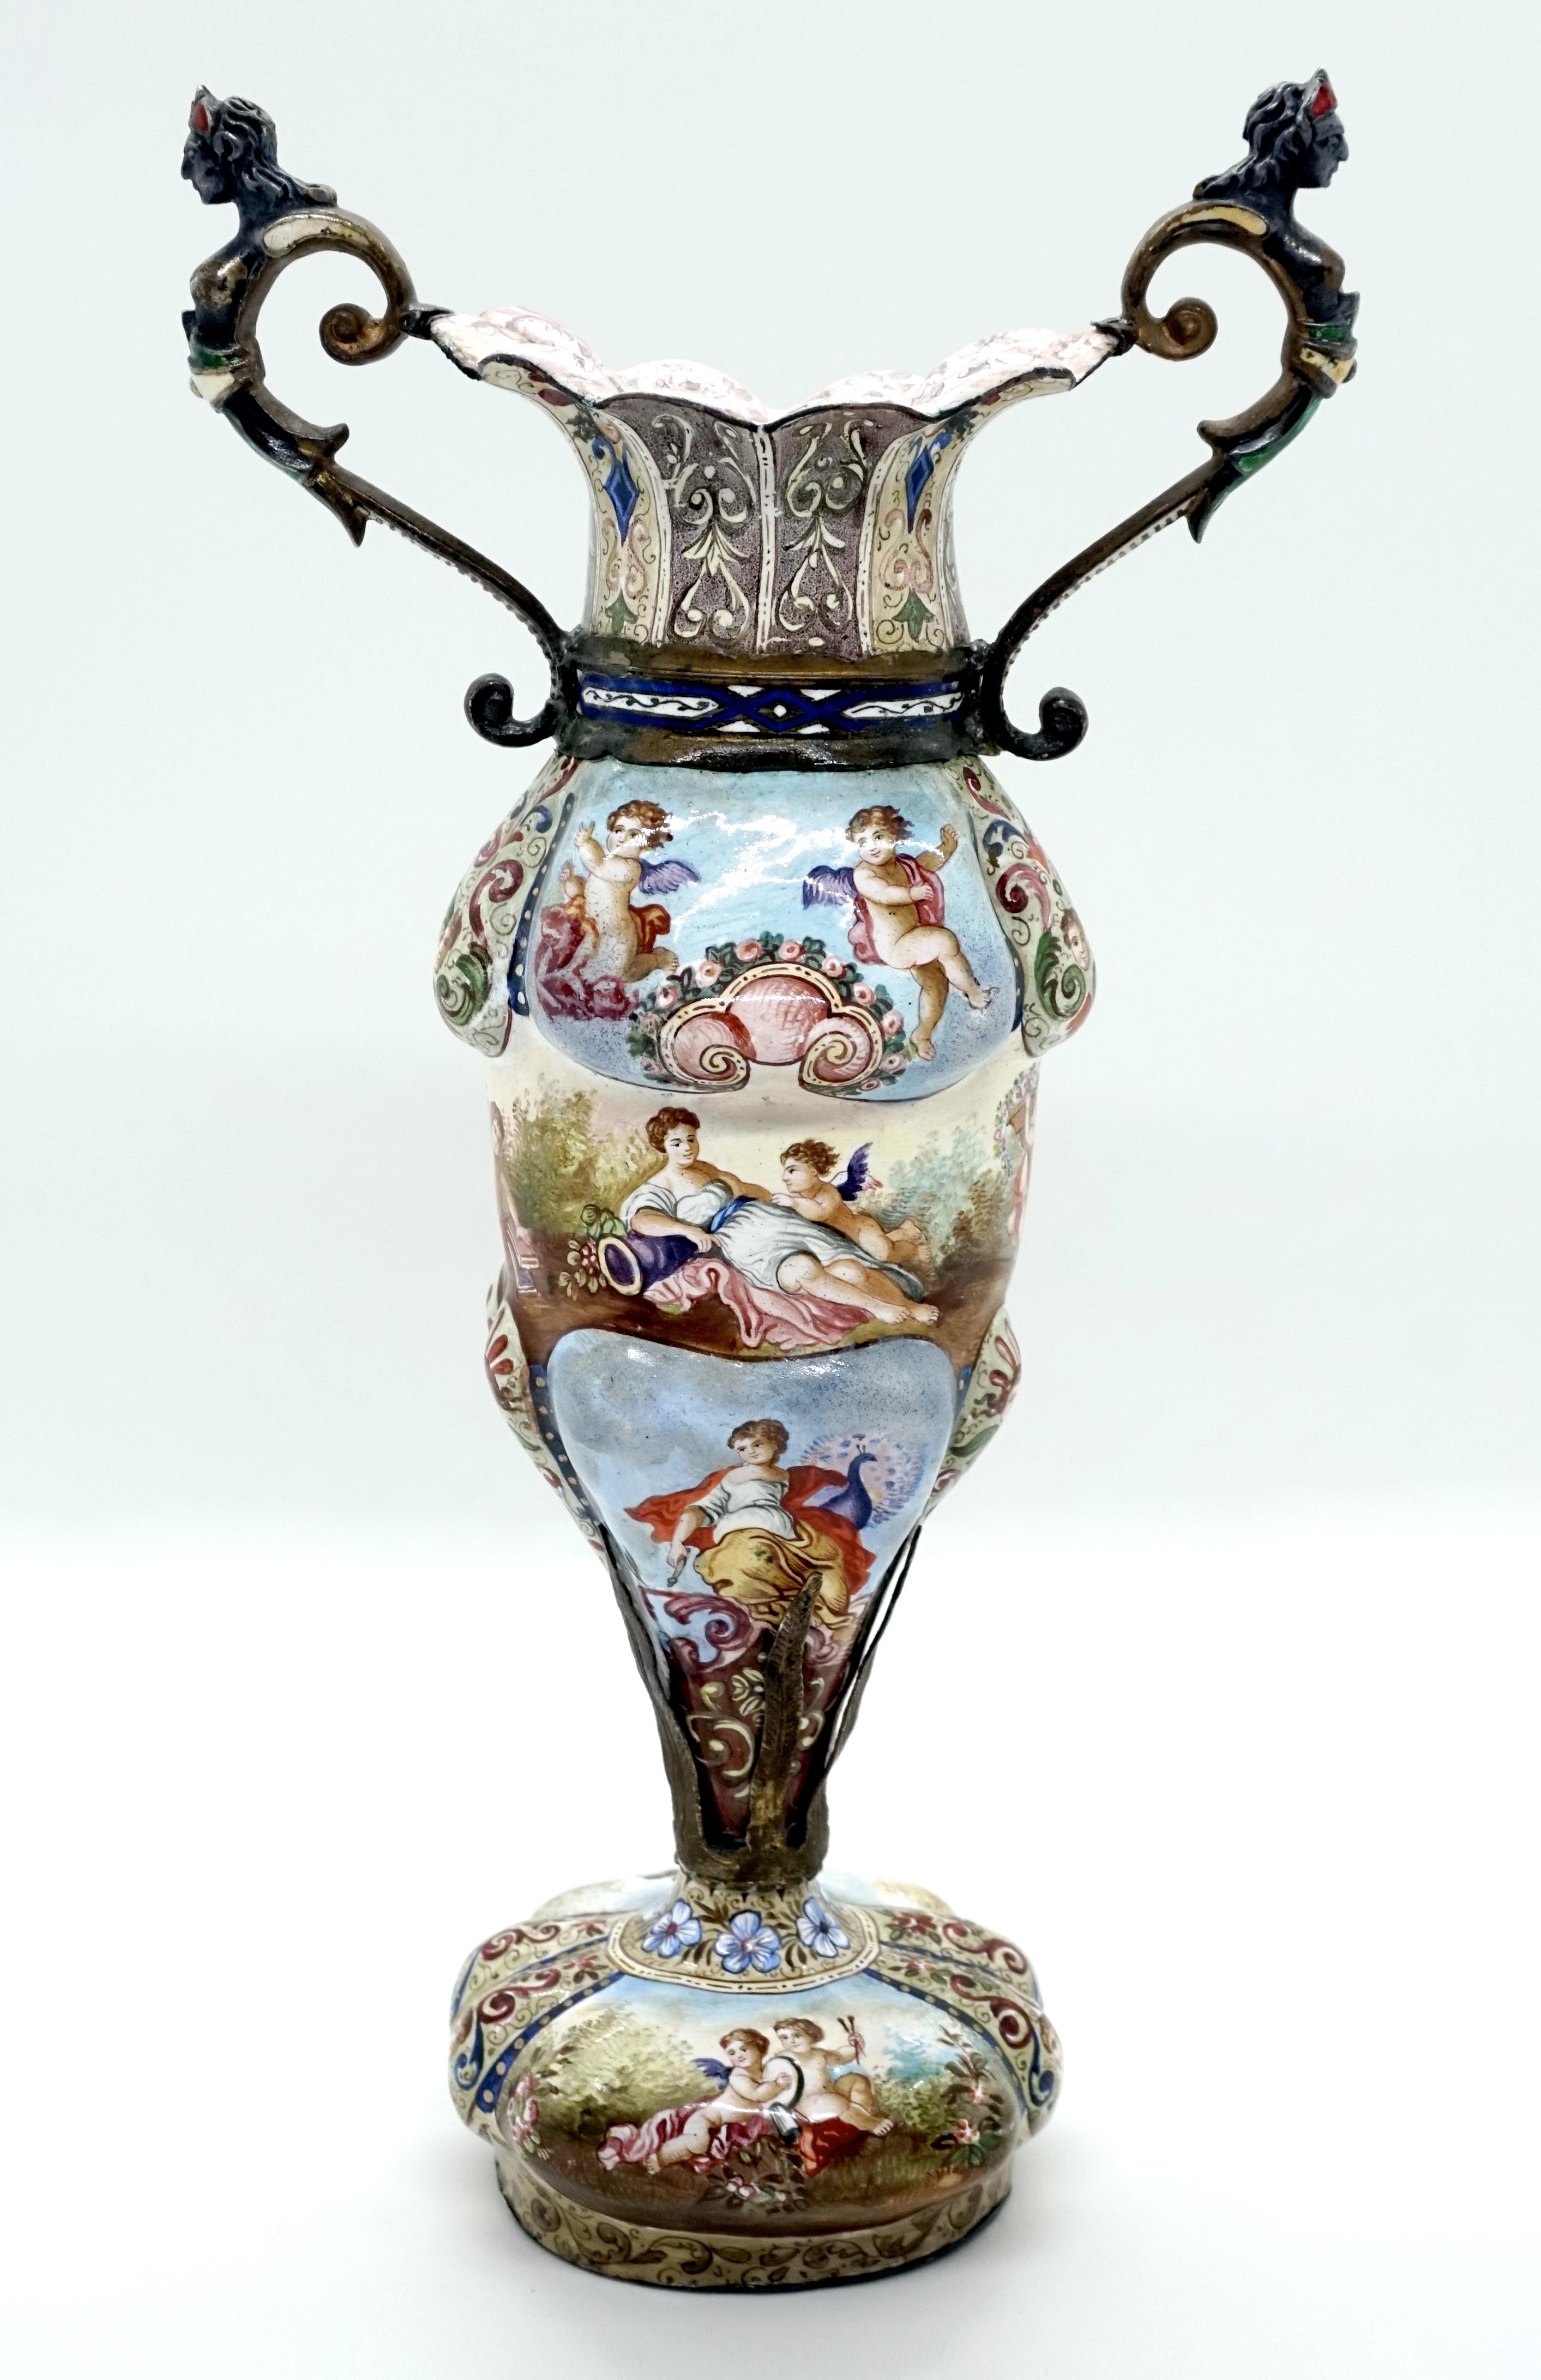 Baroque Finest 19th Century Viennese Enamel Amphora with Cupids and Antique Scenes